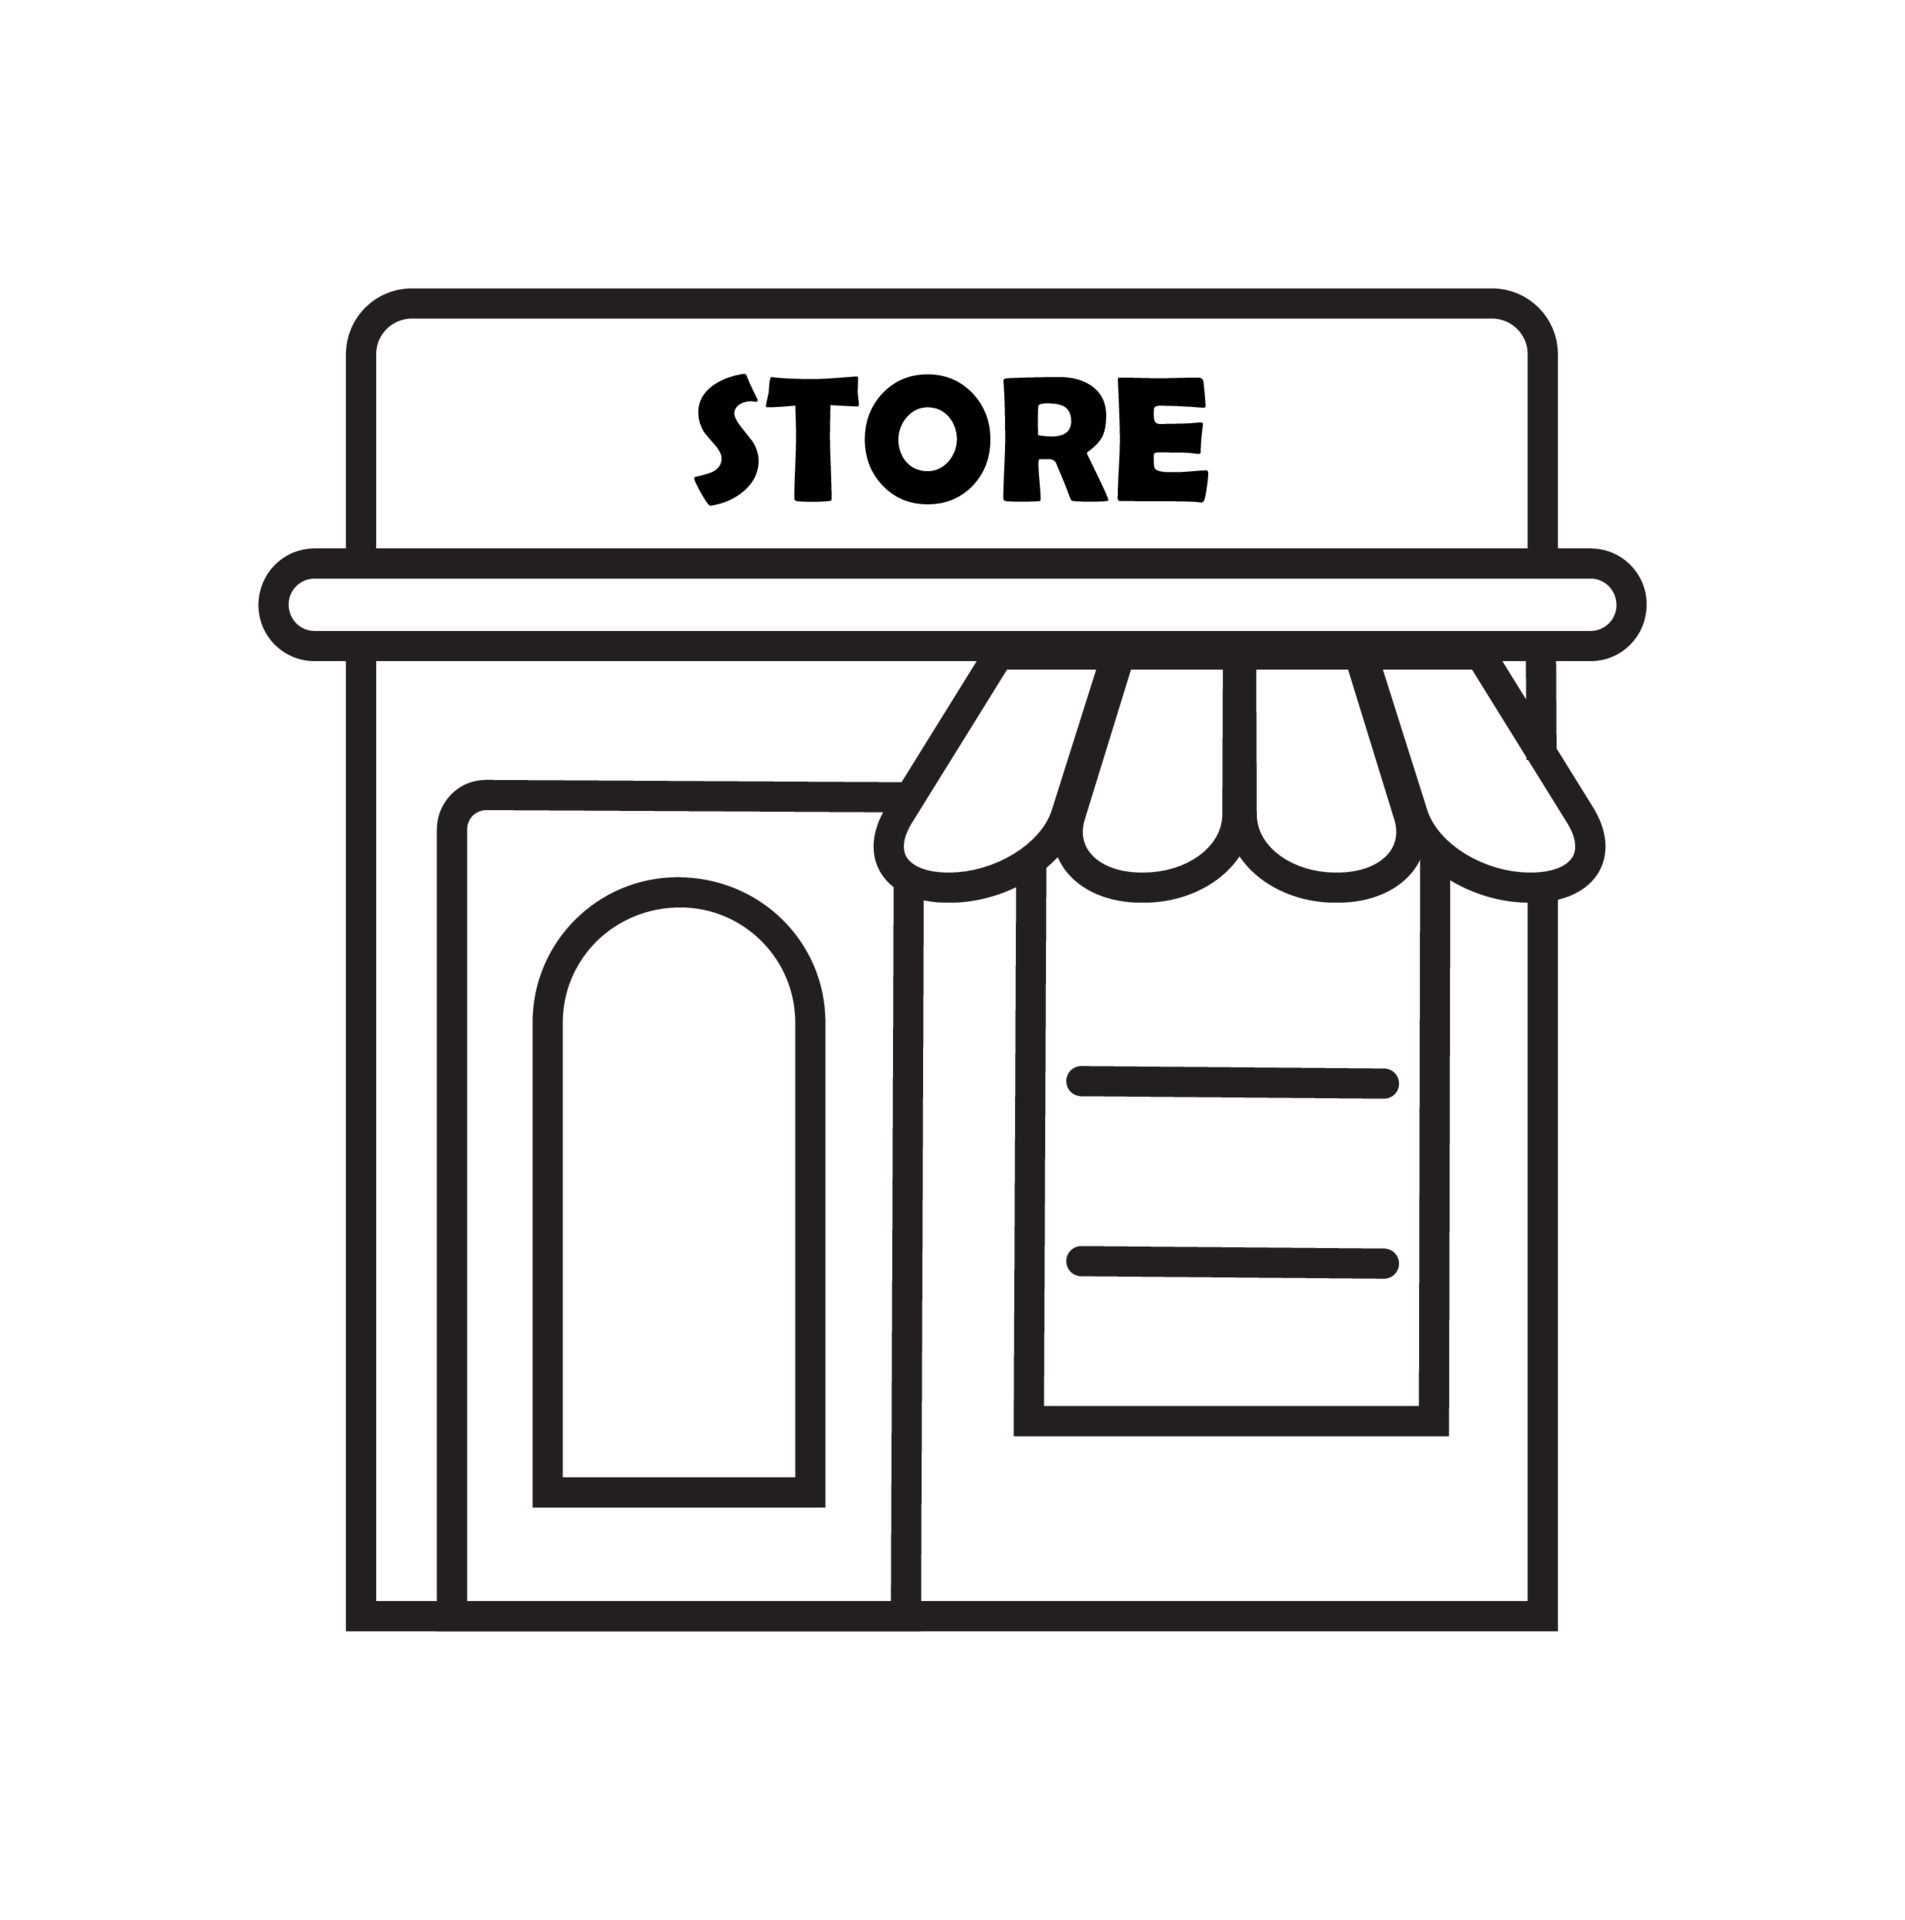 Store Shop Icon Mini Market Shopping Symbol In Outline Style Sale Customize And Buy Sign For Website Grocery Storage Delivery Illustration Retail Shipping Free Vector 